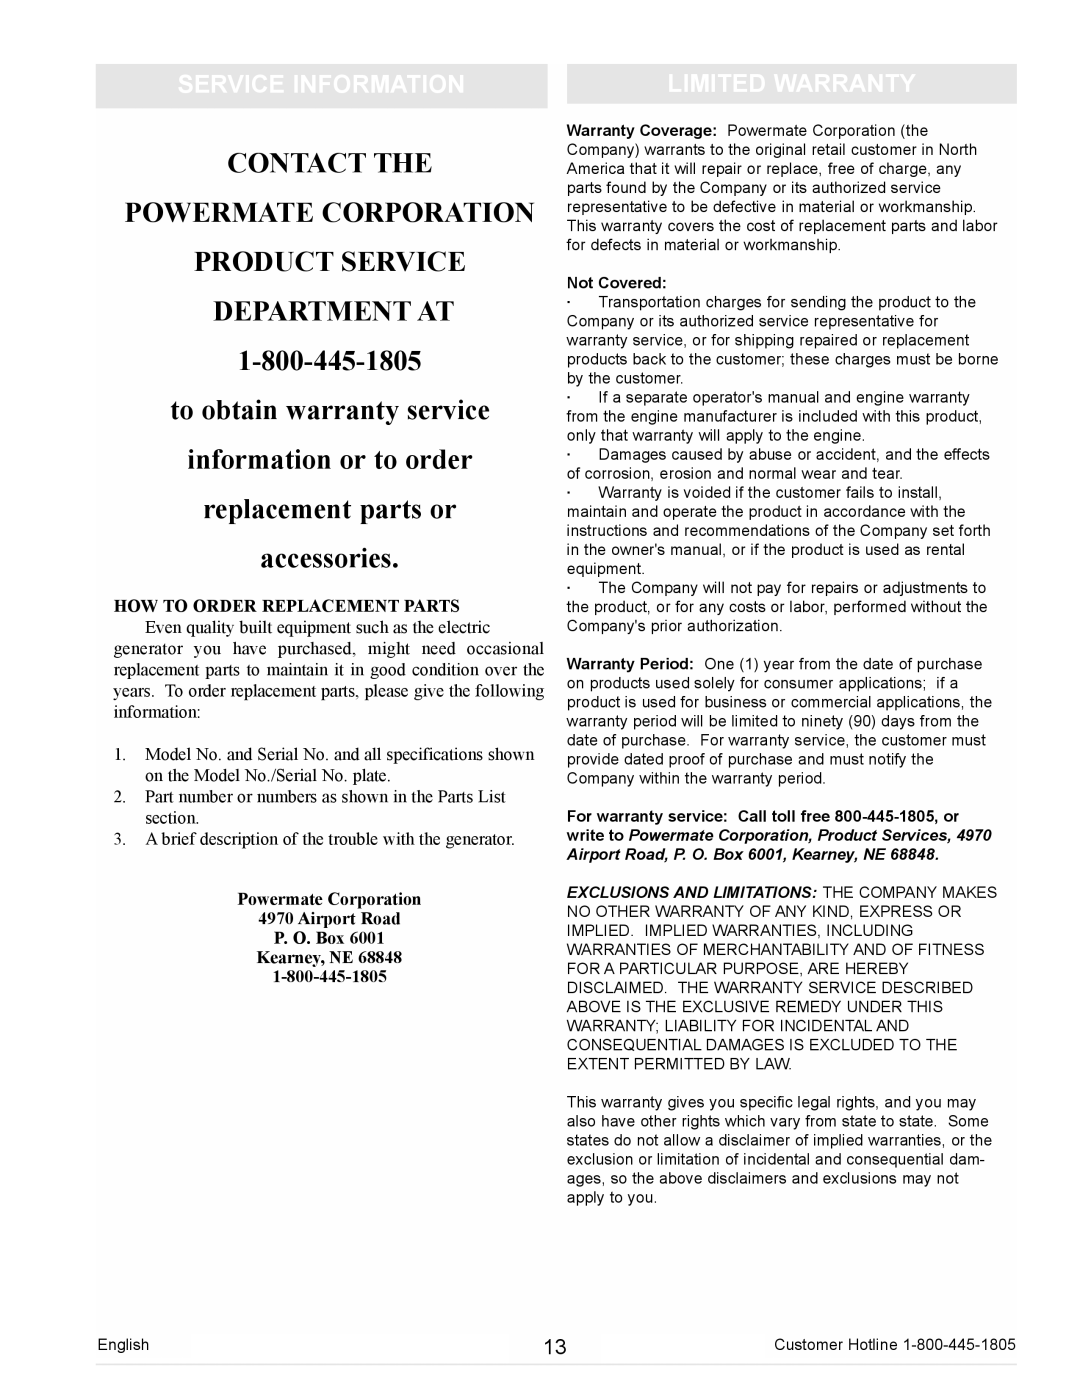 Powermate PM0105000 Contact The Powermate Corporation Product Service Department At, replacement parts or accessories 